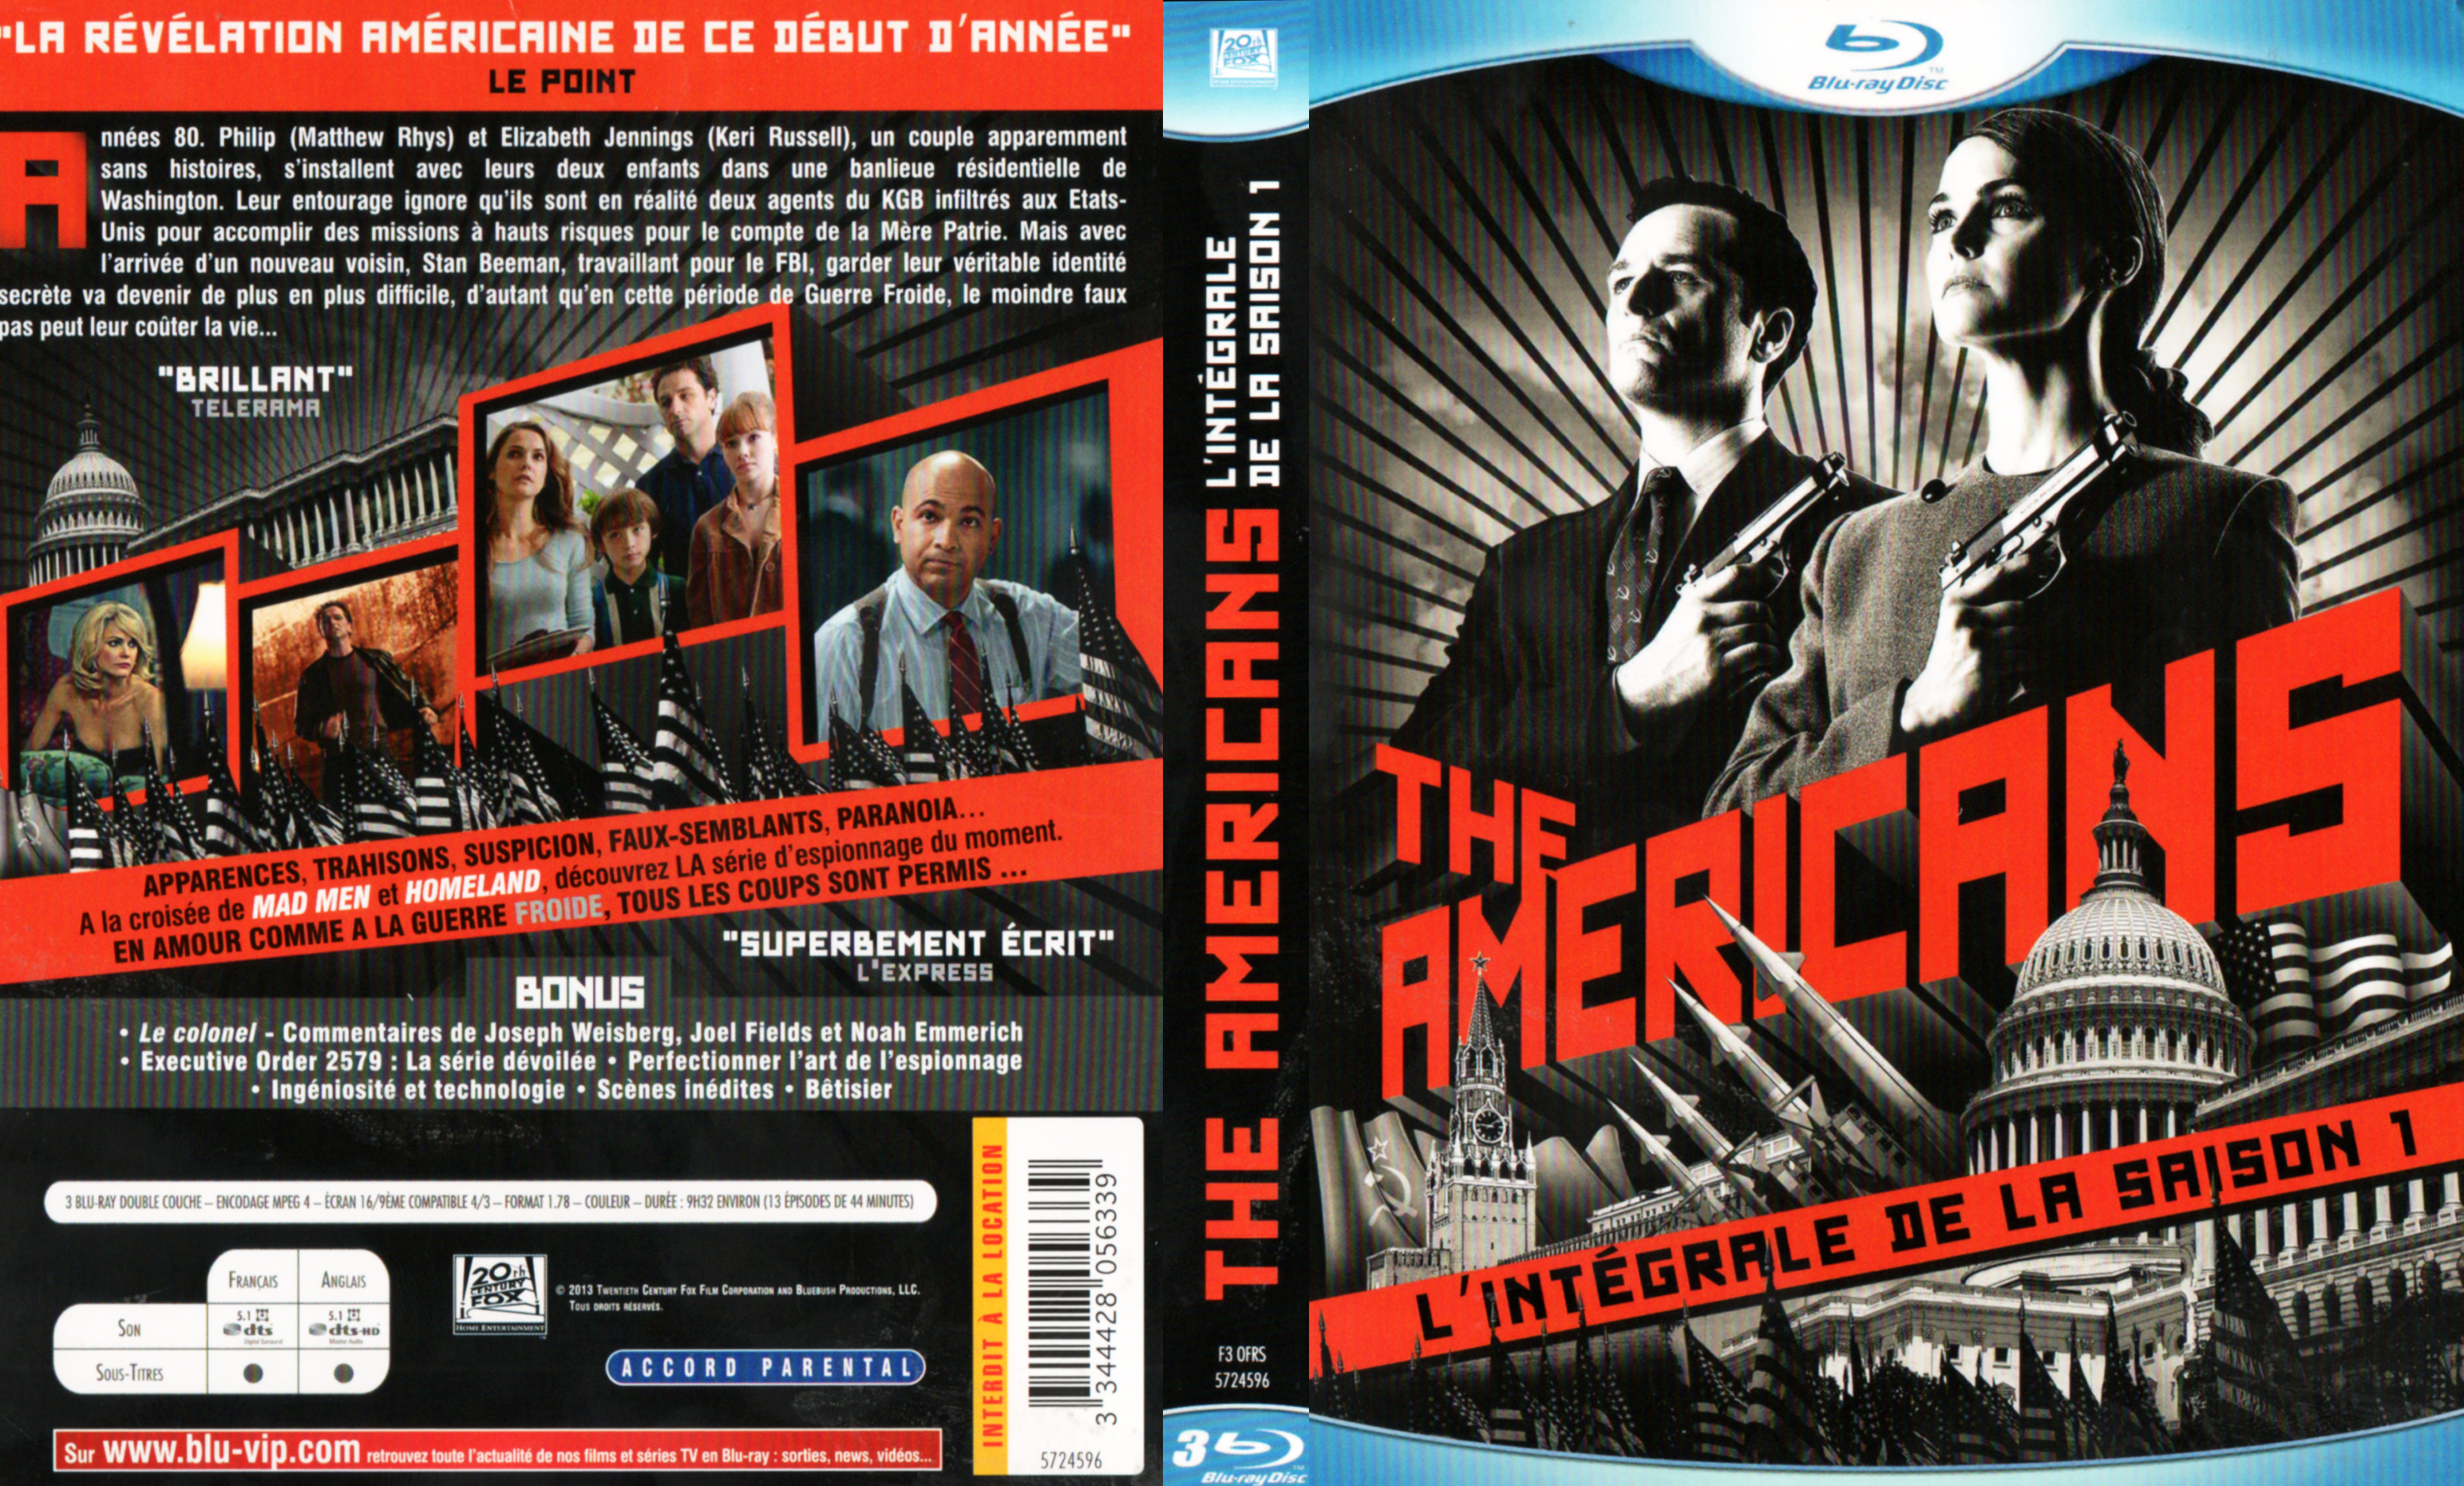 Jaquette DVD The american Saison 1 (BLU-RAY)